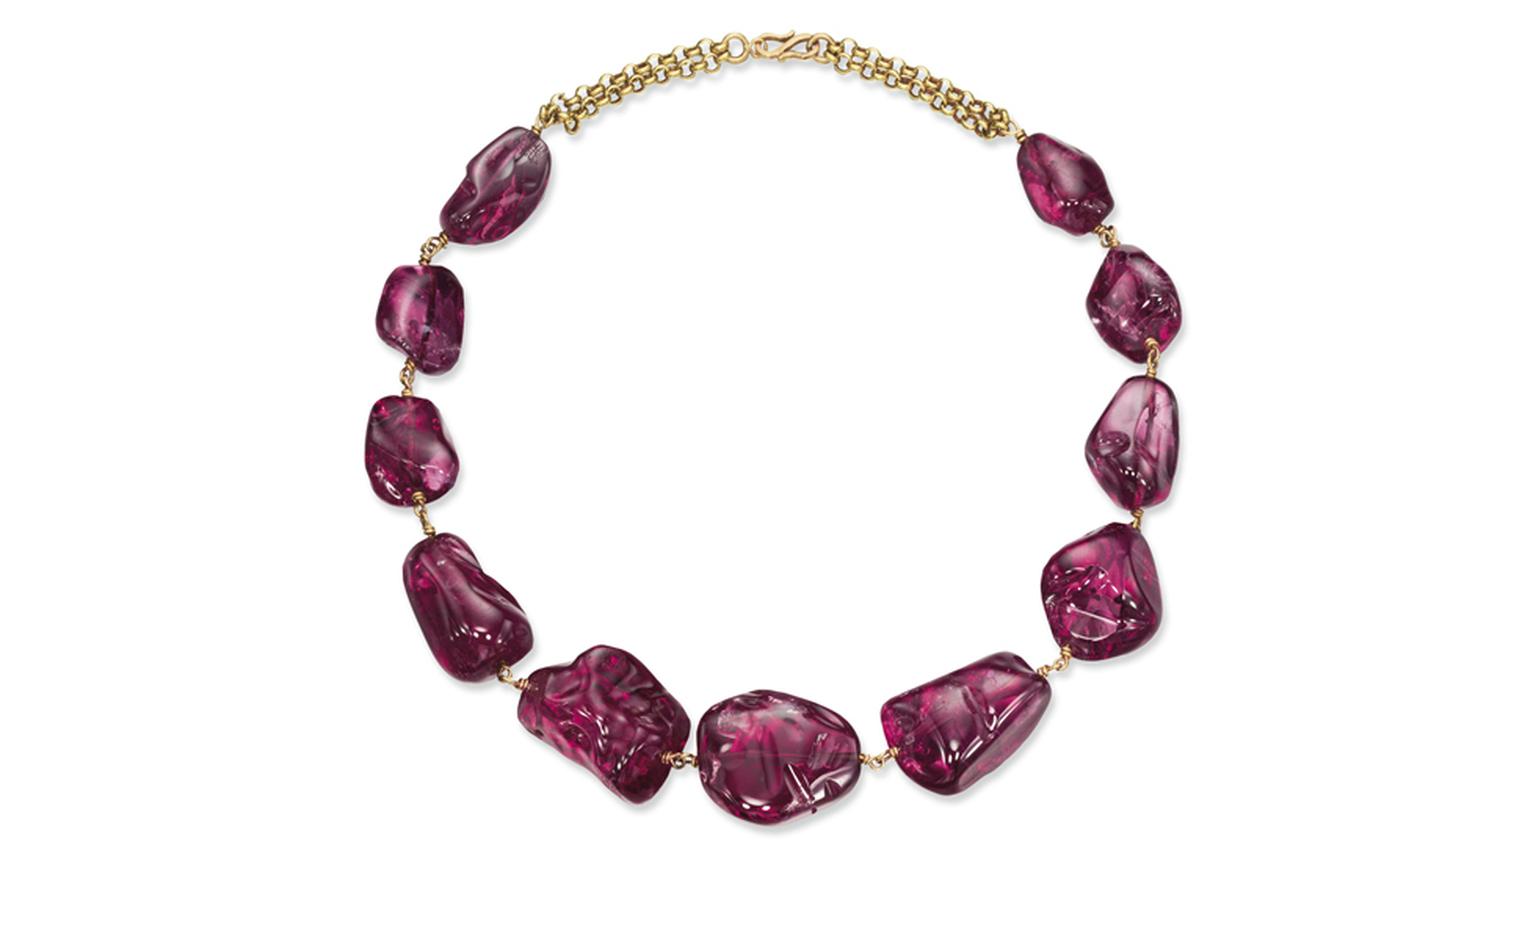 Lot 306. An imperial Mughal Spinel Necklace. With eleven polished spinels, yellow gold link backchain and hook clasp. Estimate CHF 1,450,000 - CHF 2,400,000 SOLD FOR CHF 4,579,000